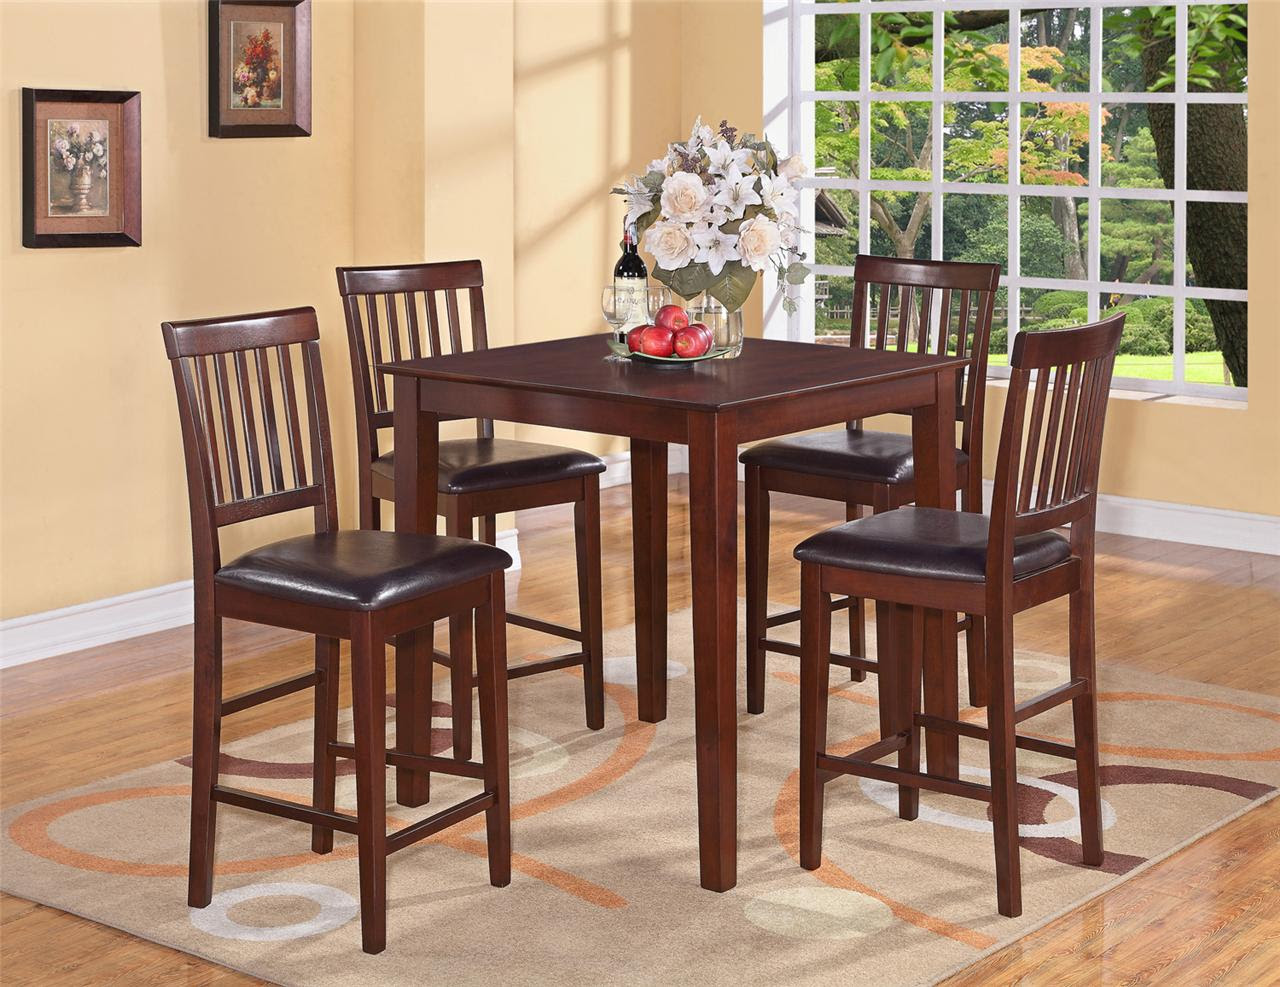 tall 4 chair kitchen table